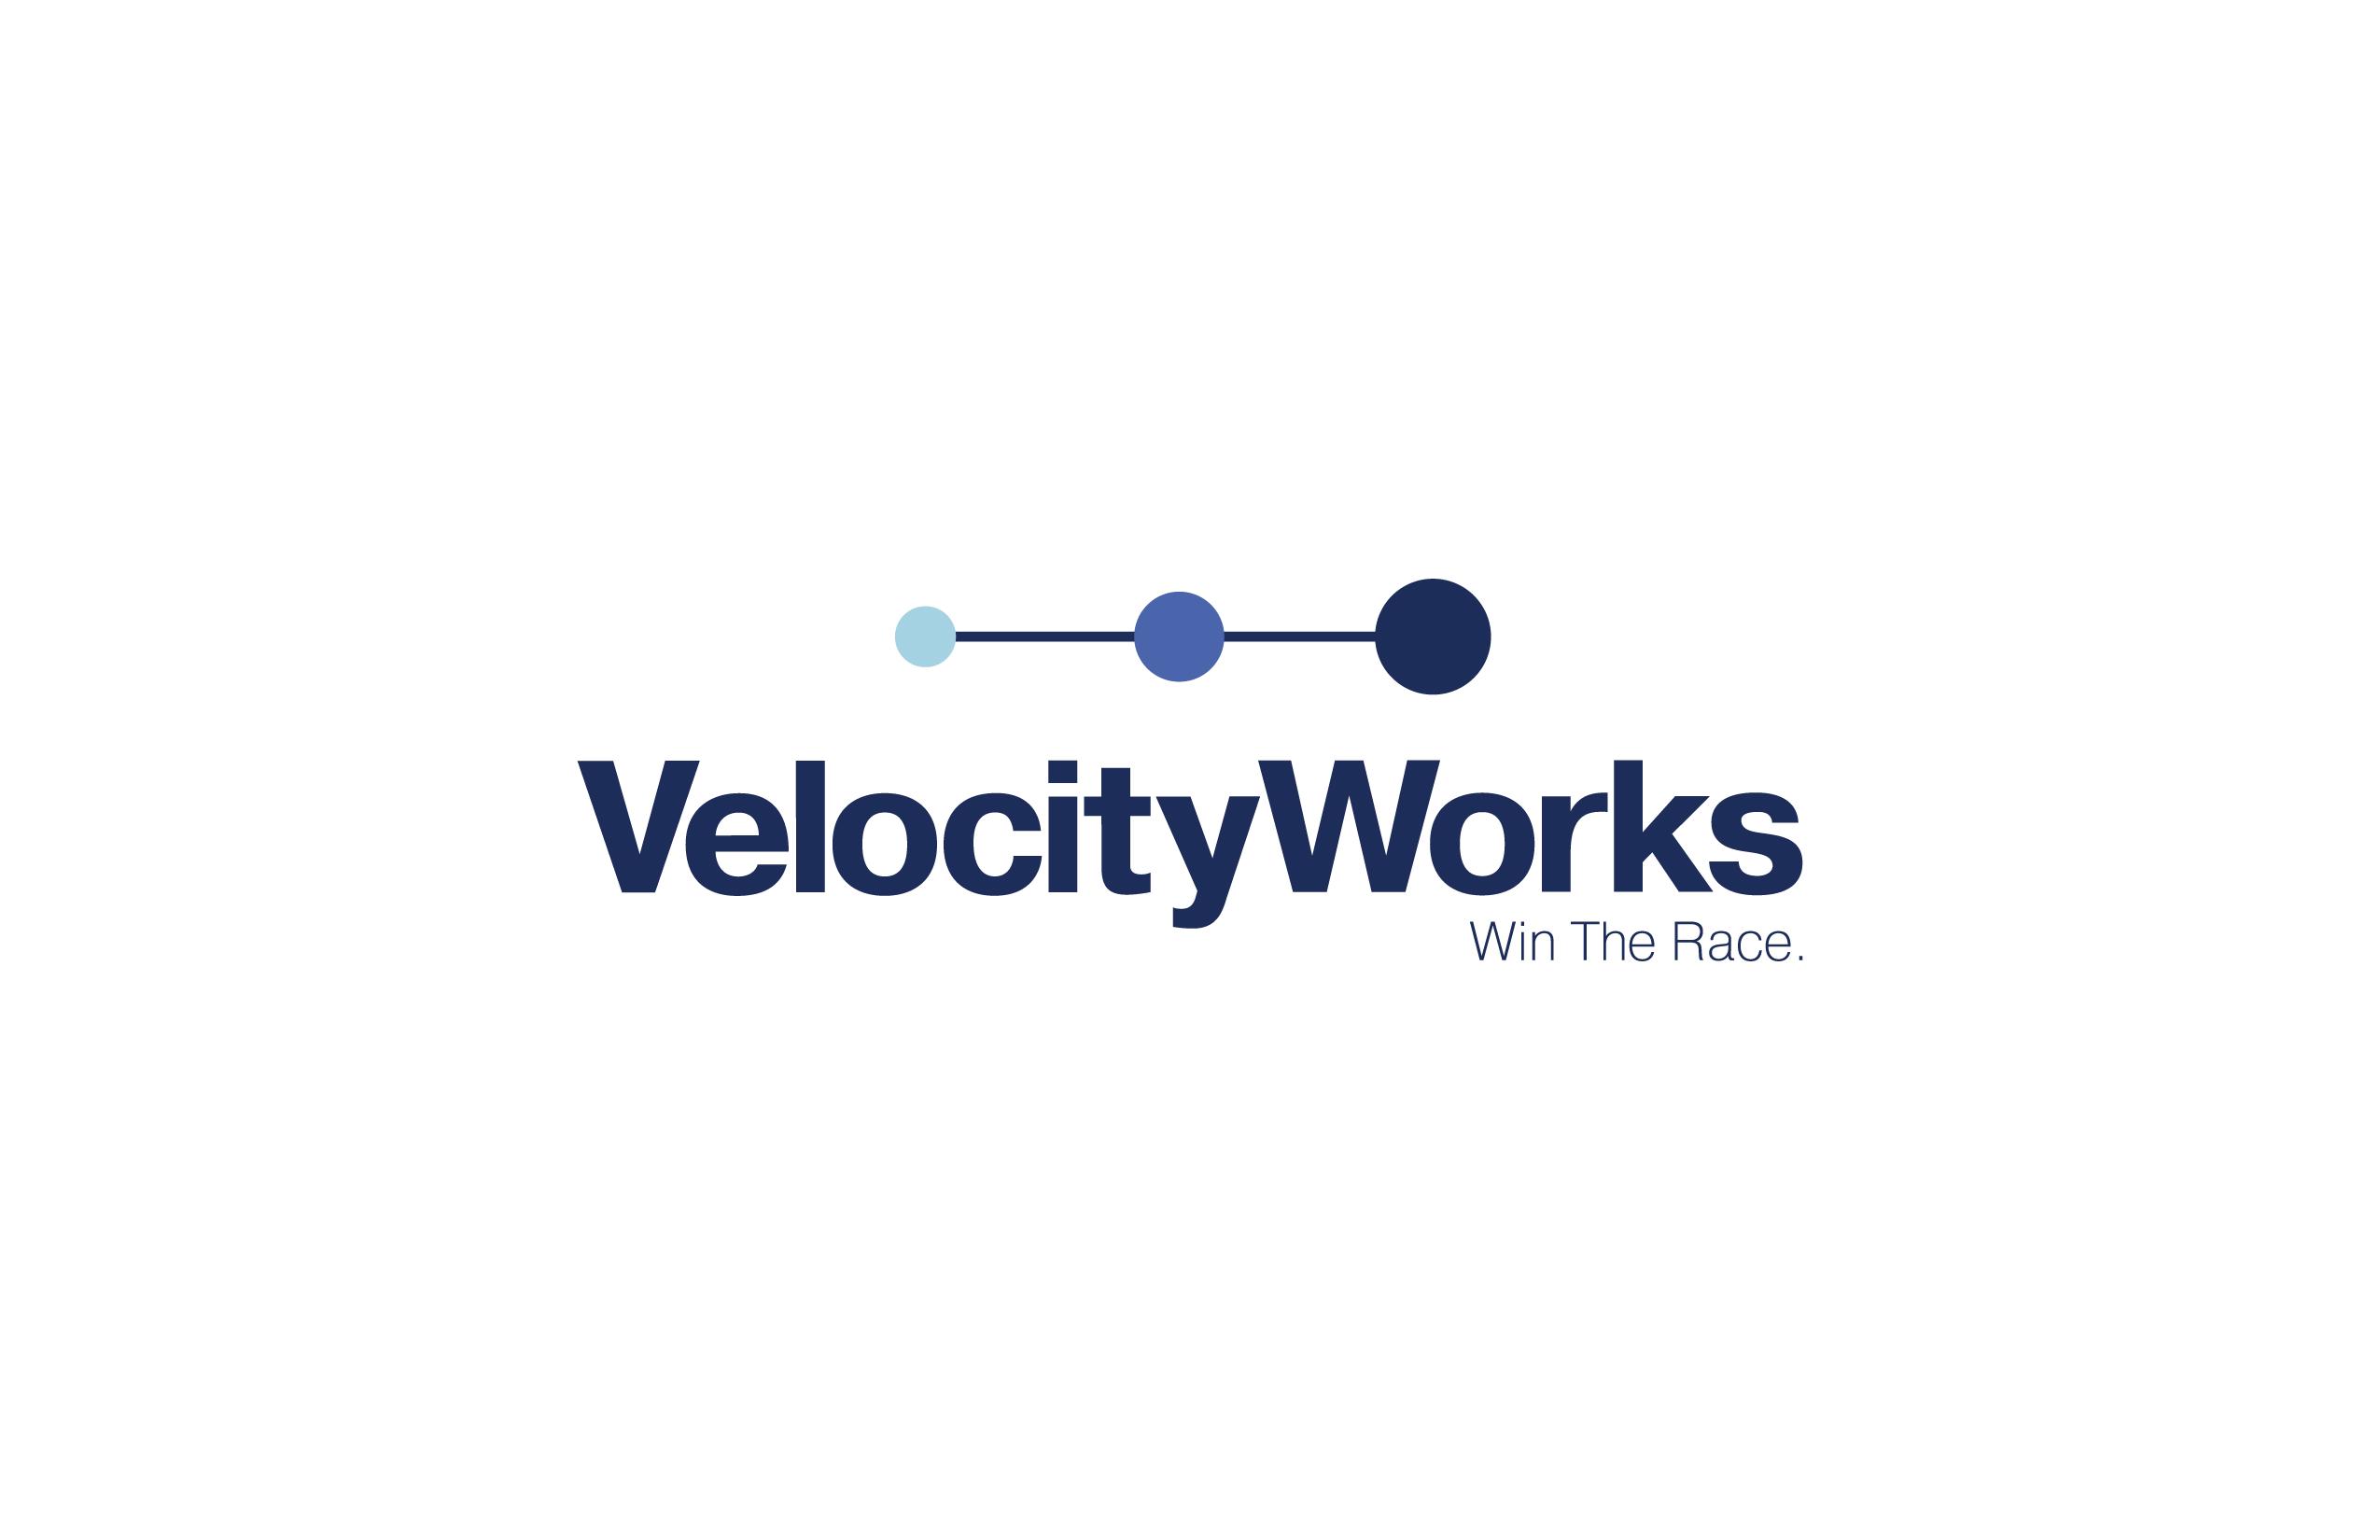 Velocity Works profile on Qualified.One